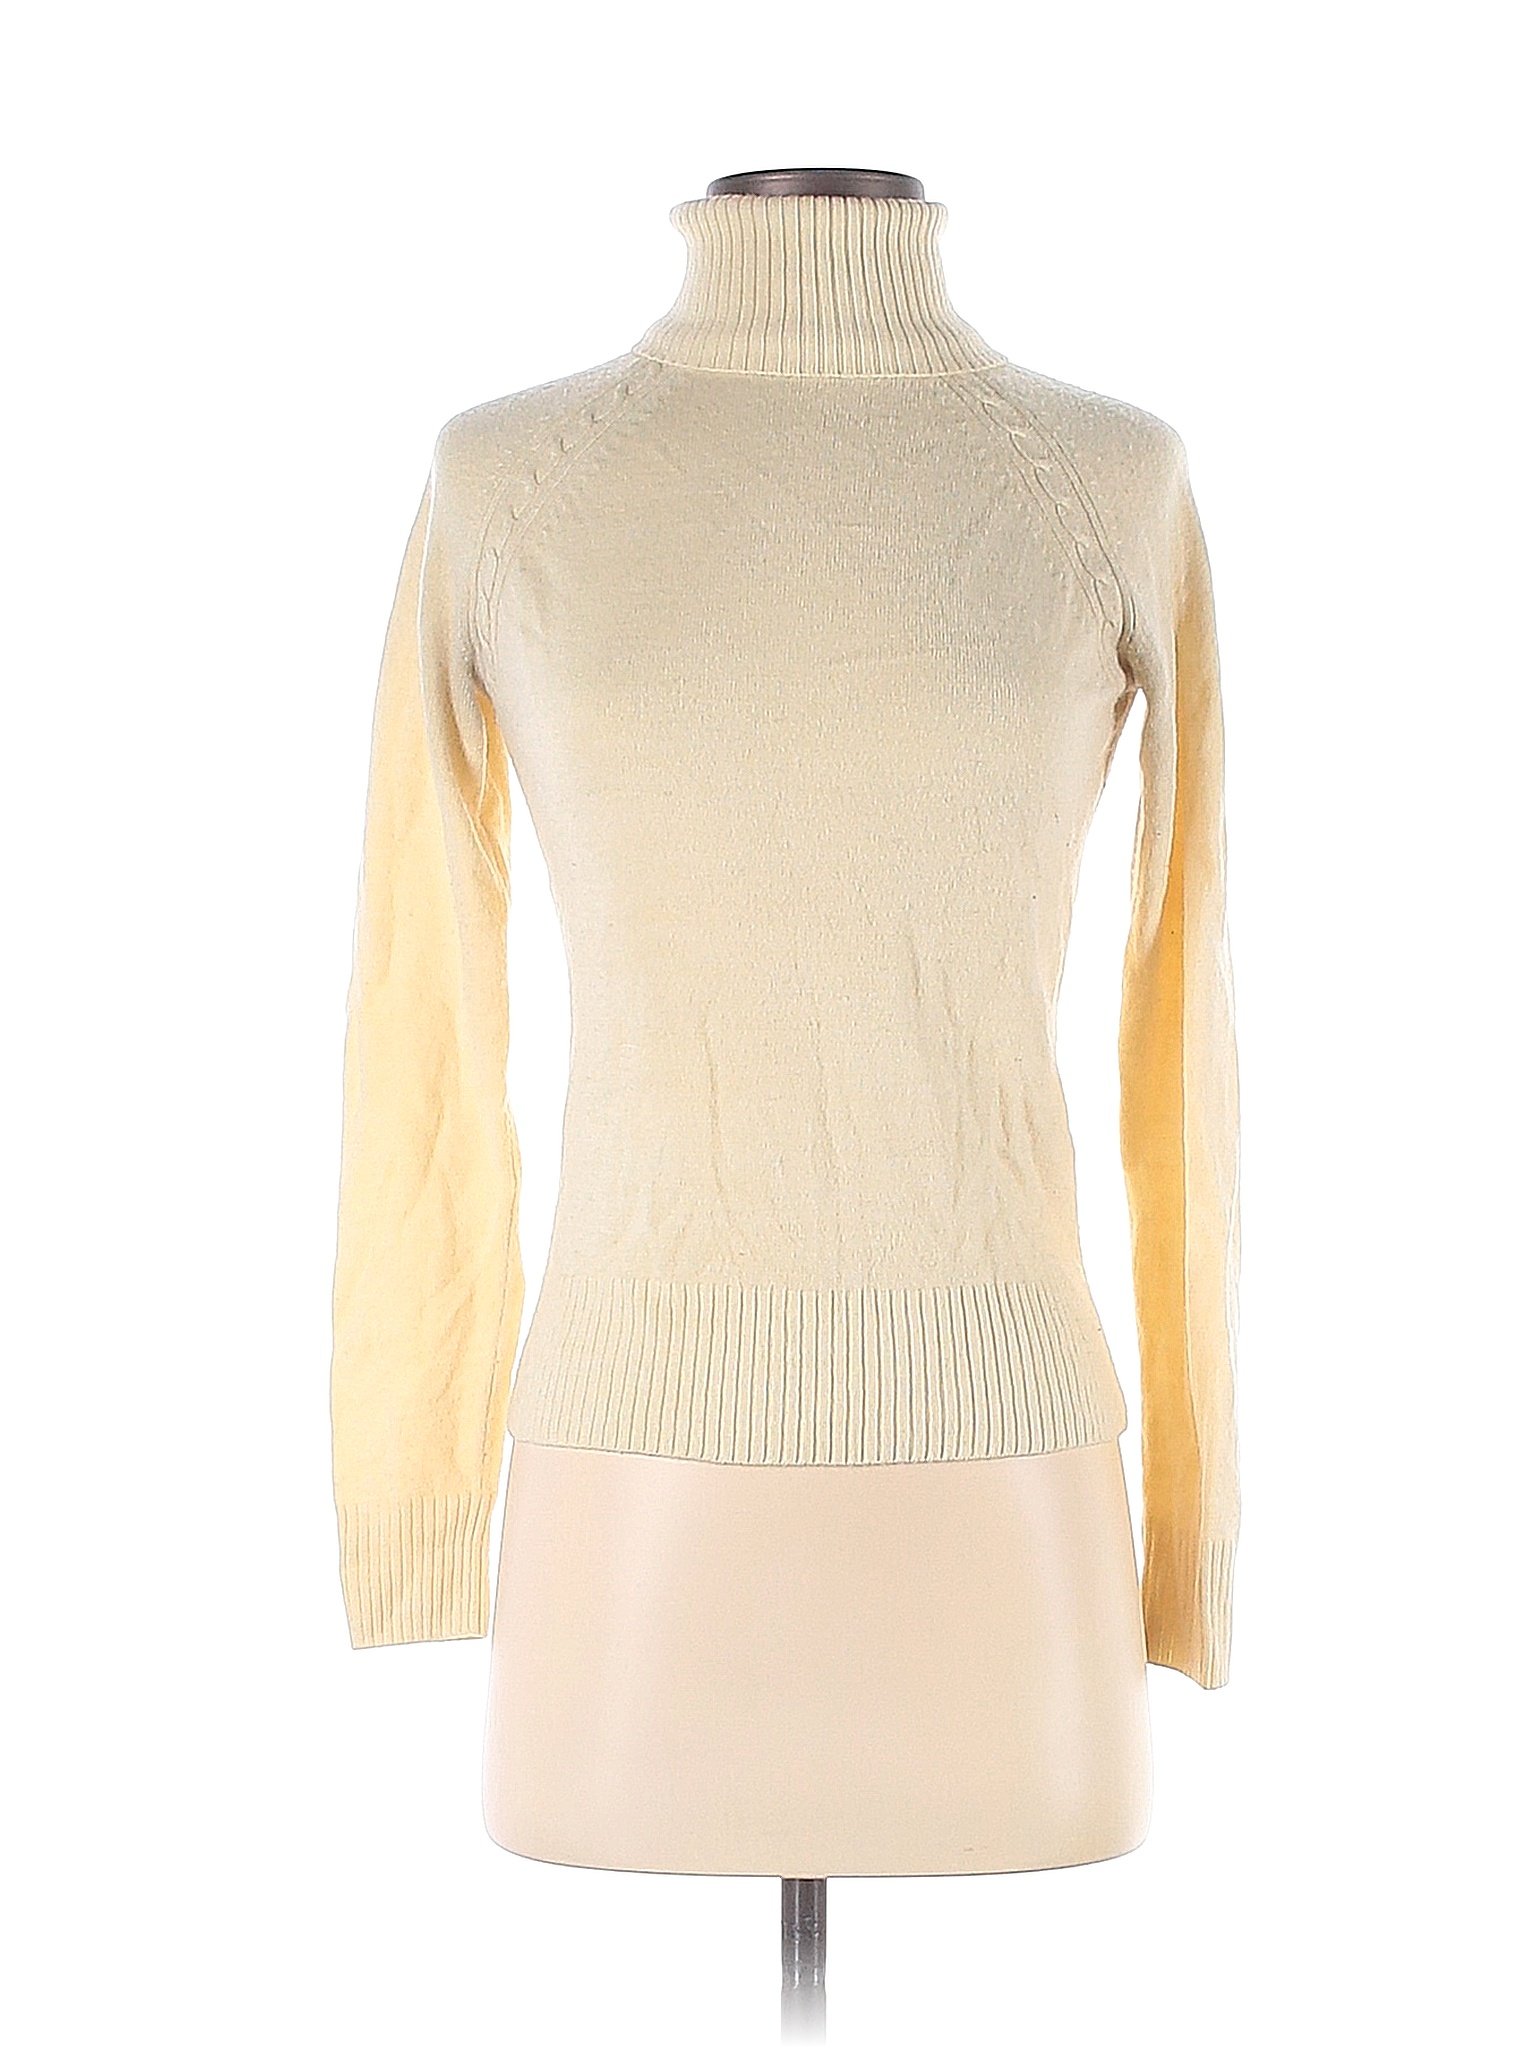 G.H. Bass & Co. 100% Acrylic Solid Tan Ivory Turtleneck Sweater Size XS ...